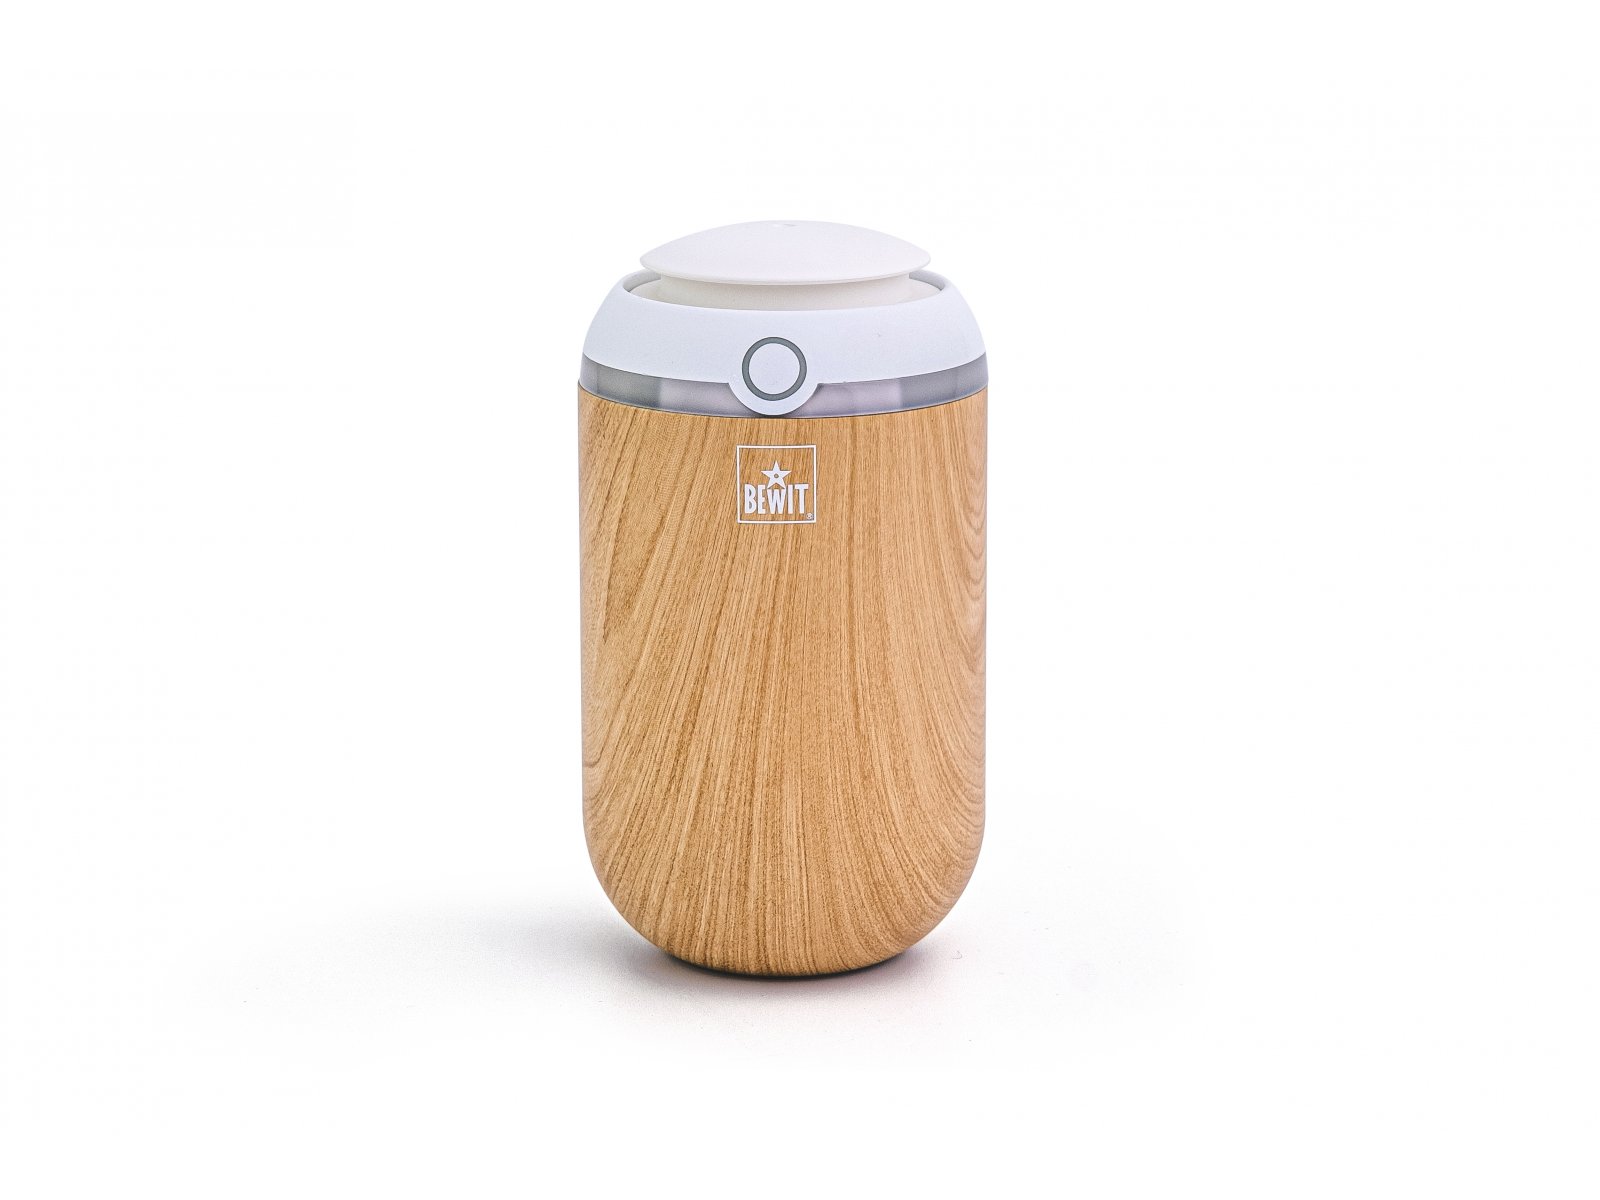 BEWIT Aroma diffuser waterless STRONG, light wood - Waterless diffuser - 1